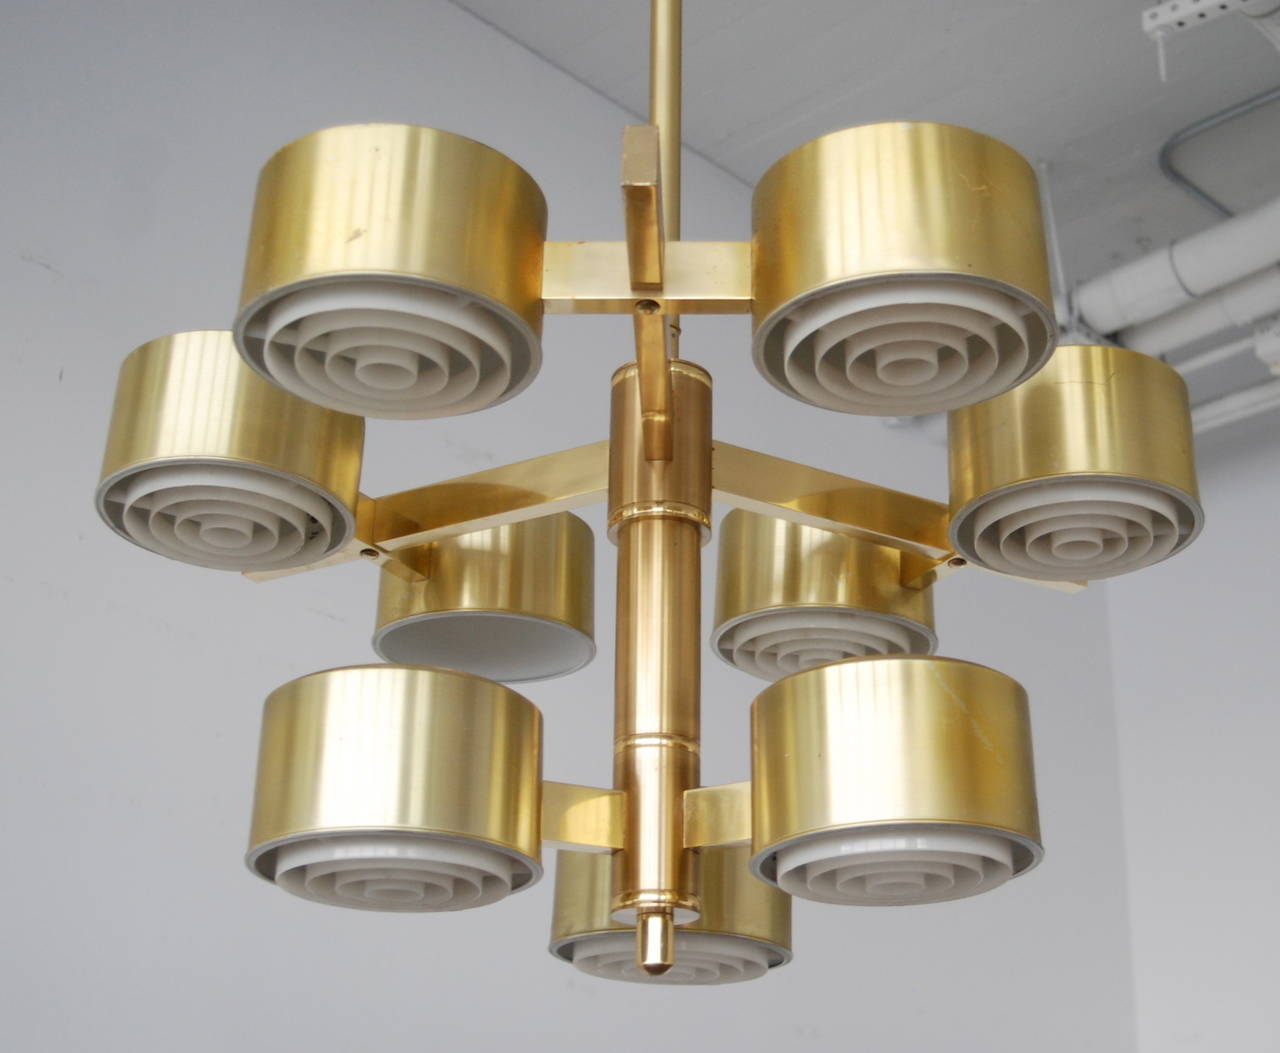 Large chandelier designed by Hans-Agne Jakobsson for Markaryd, Sweden, circa 1960s.
Newly rewired with nine porcelain Edison style sockets. Ready for installation.
Some scratches on the shades.
Measures: Diameter 31